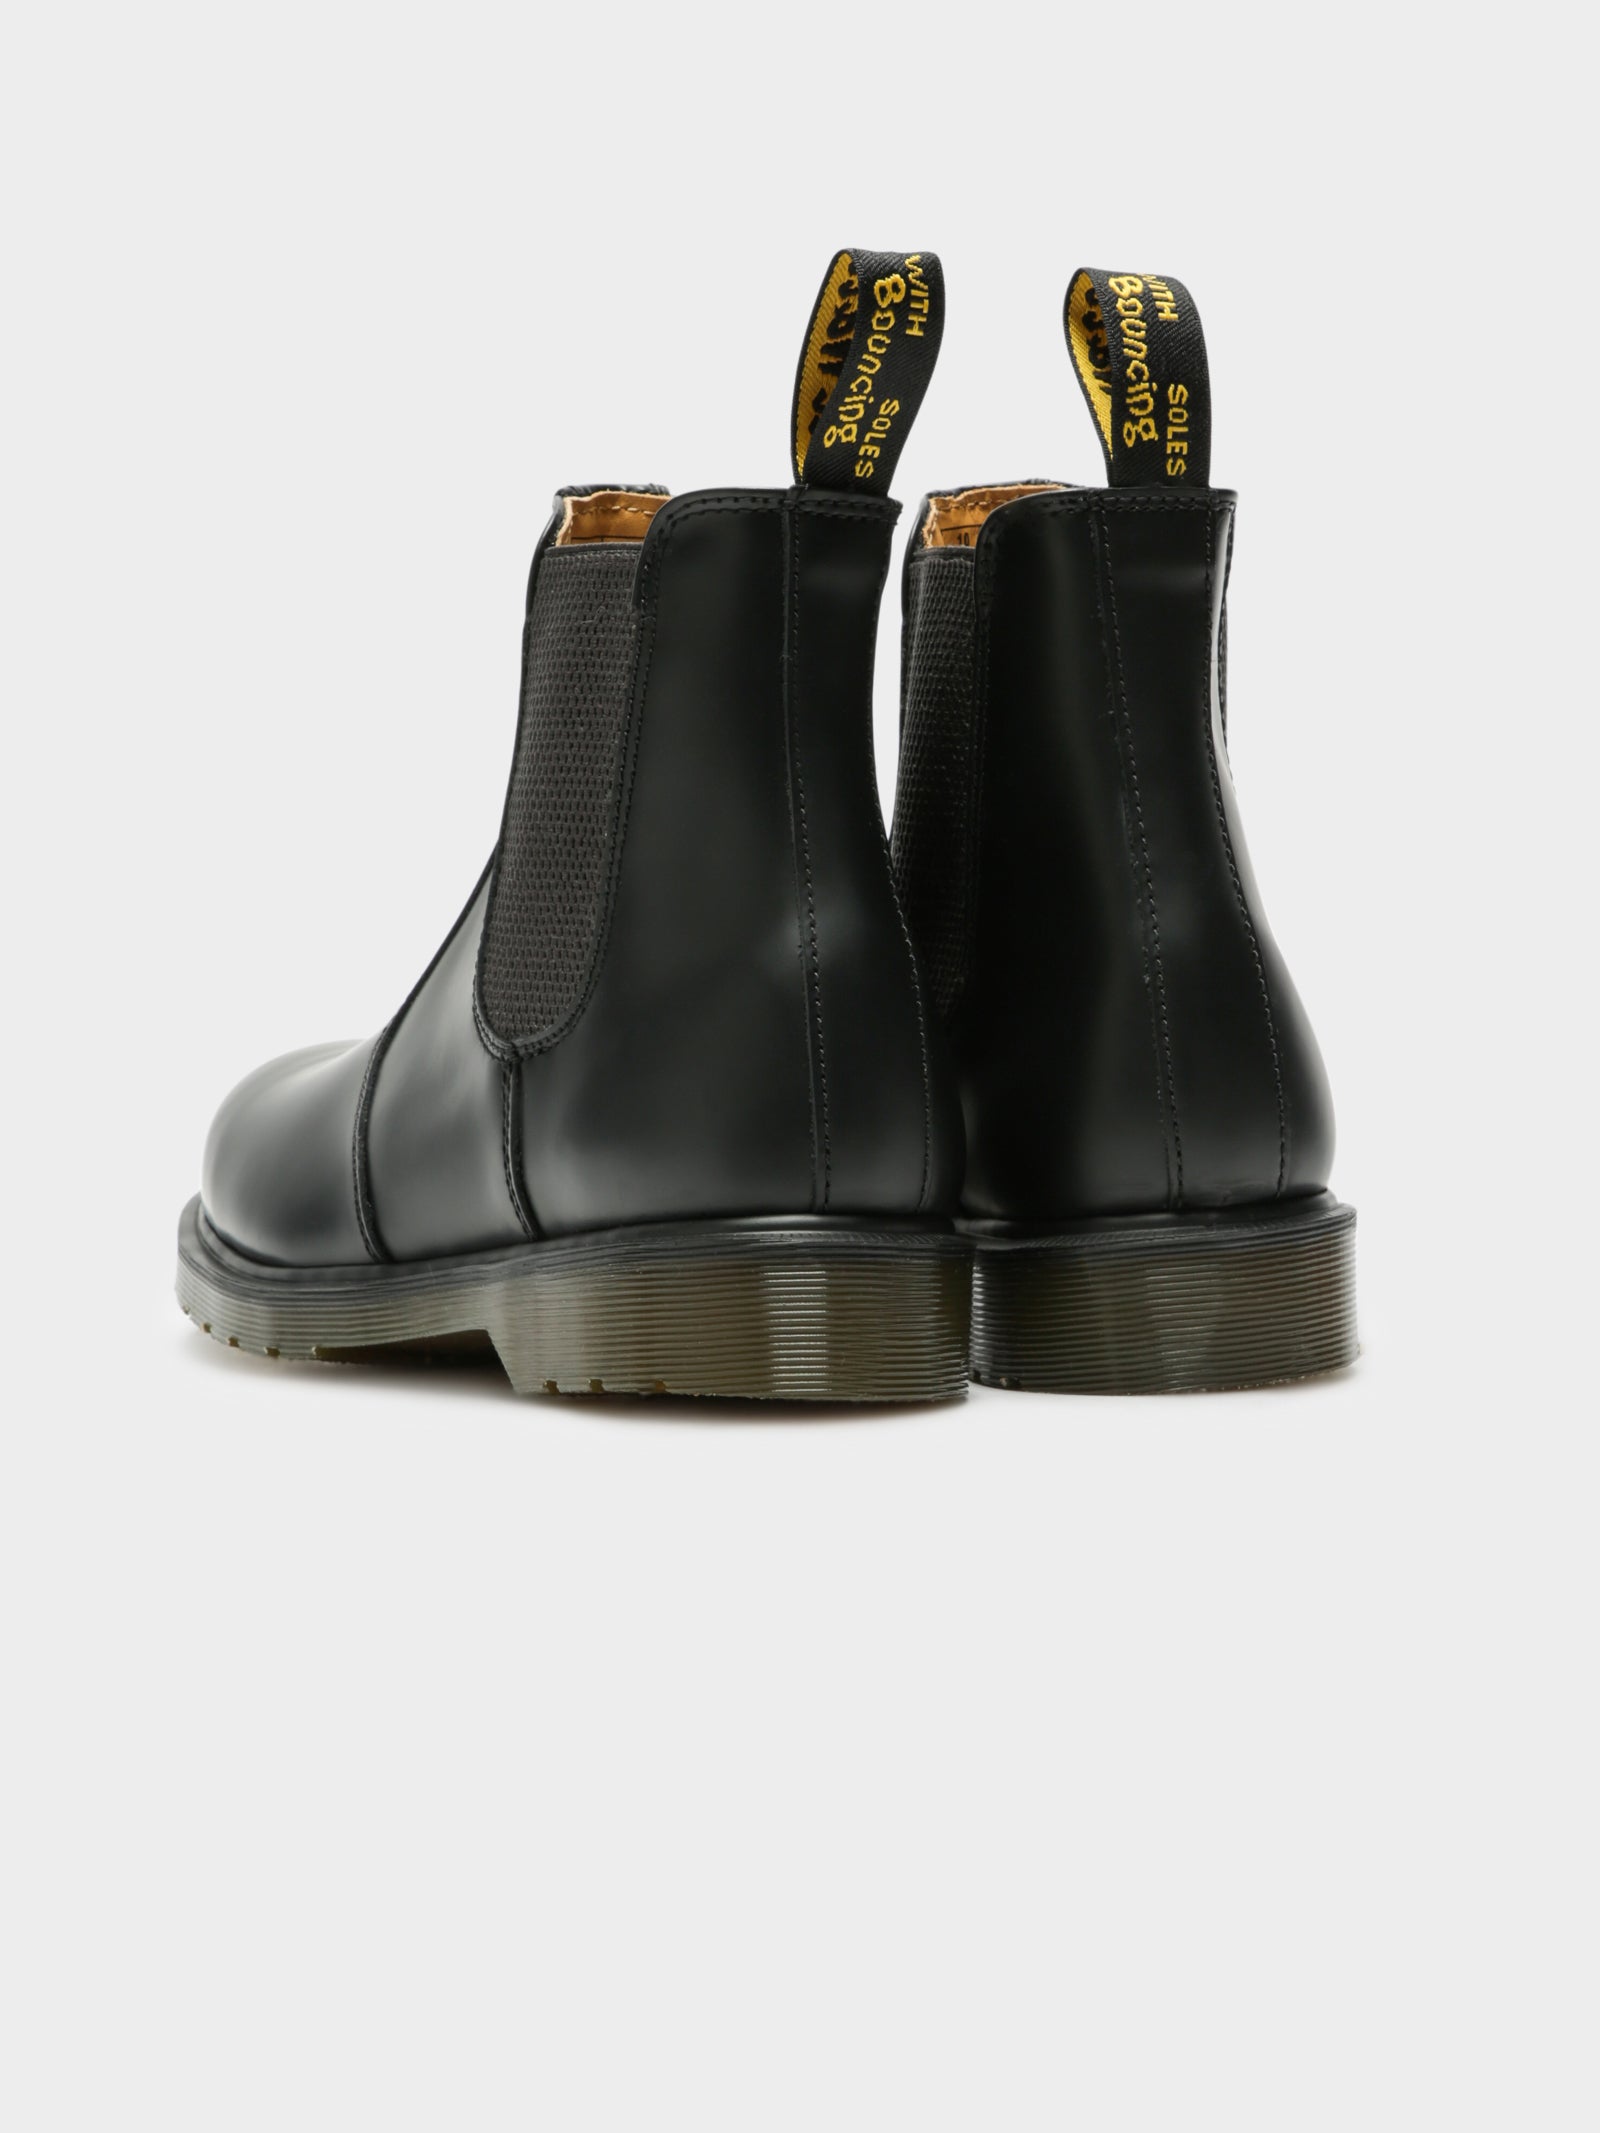 Unisex 2976 Chelsea Boots in Black